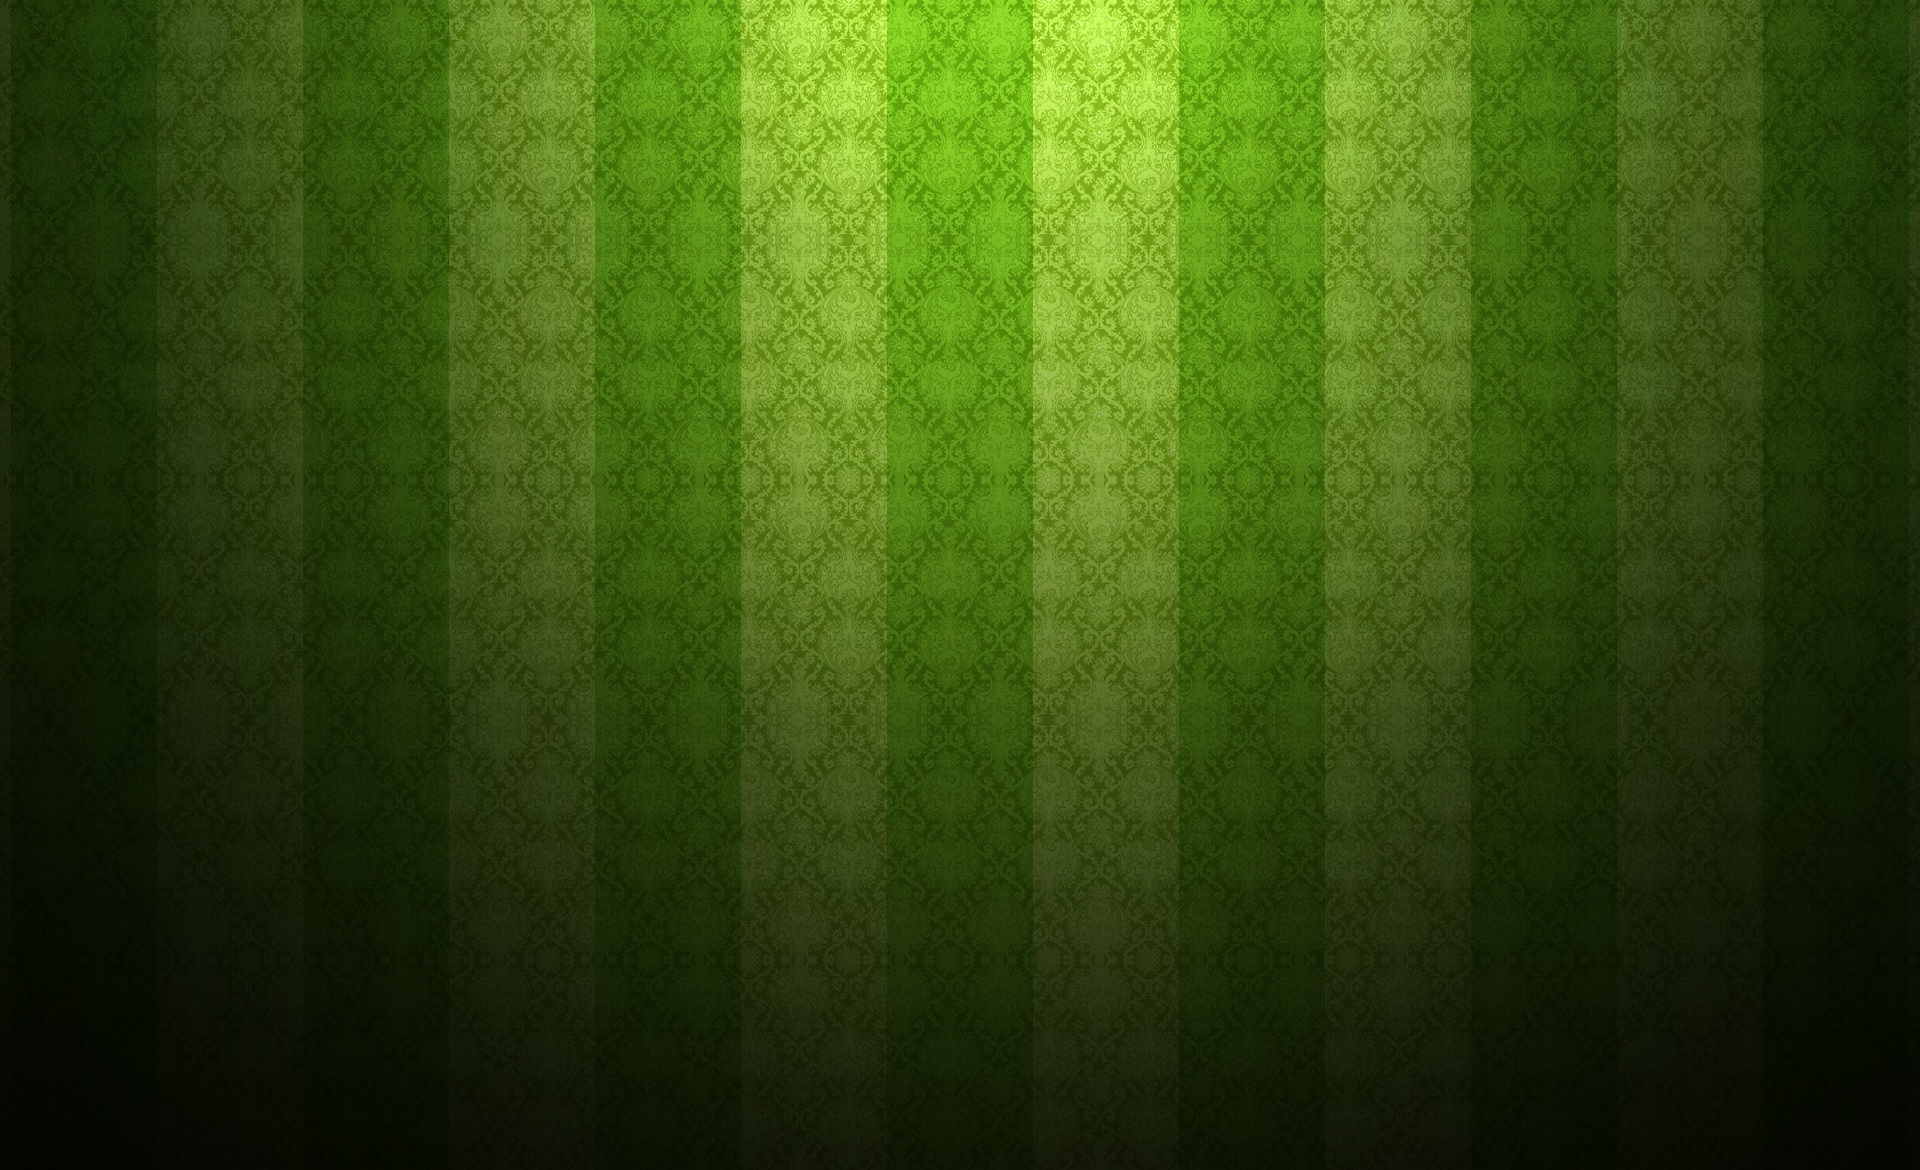 Pictures Background Wallpaper Texture Image Pattern Green